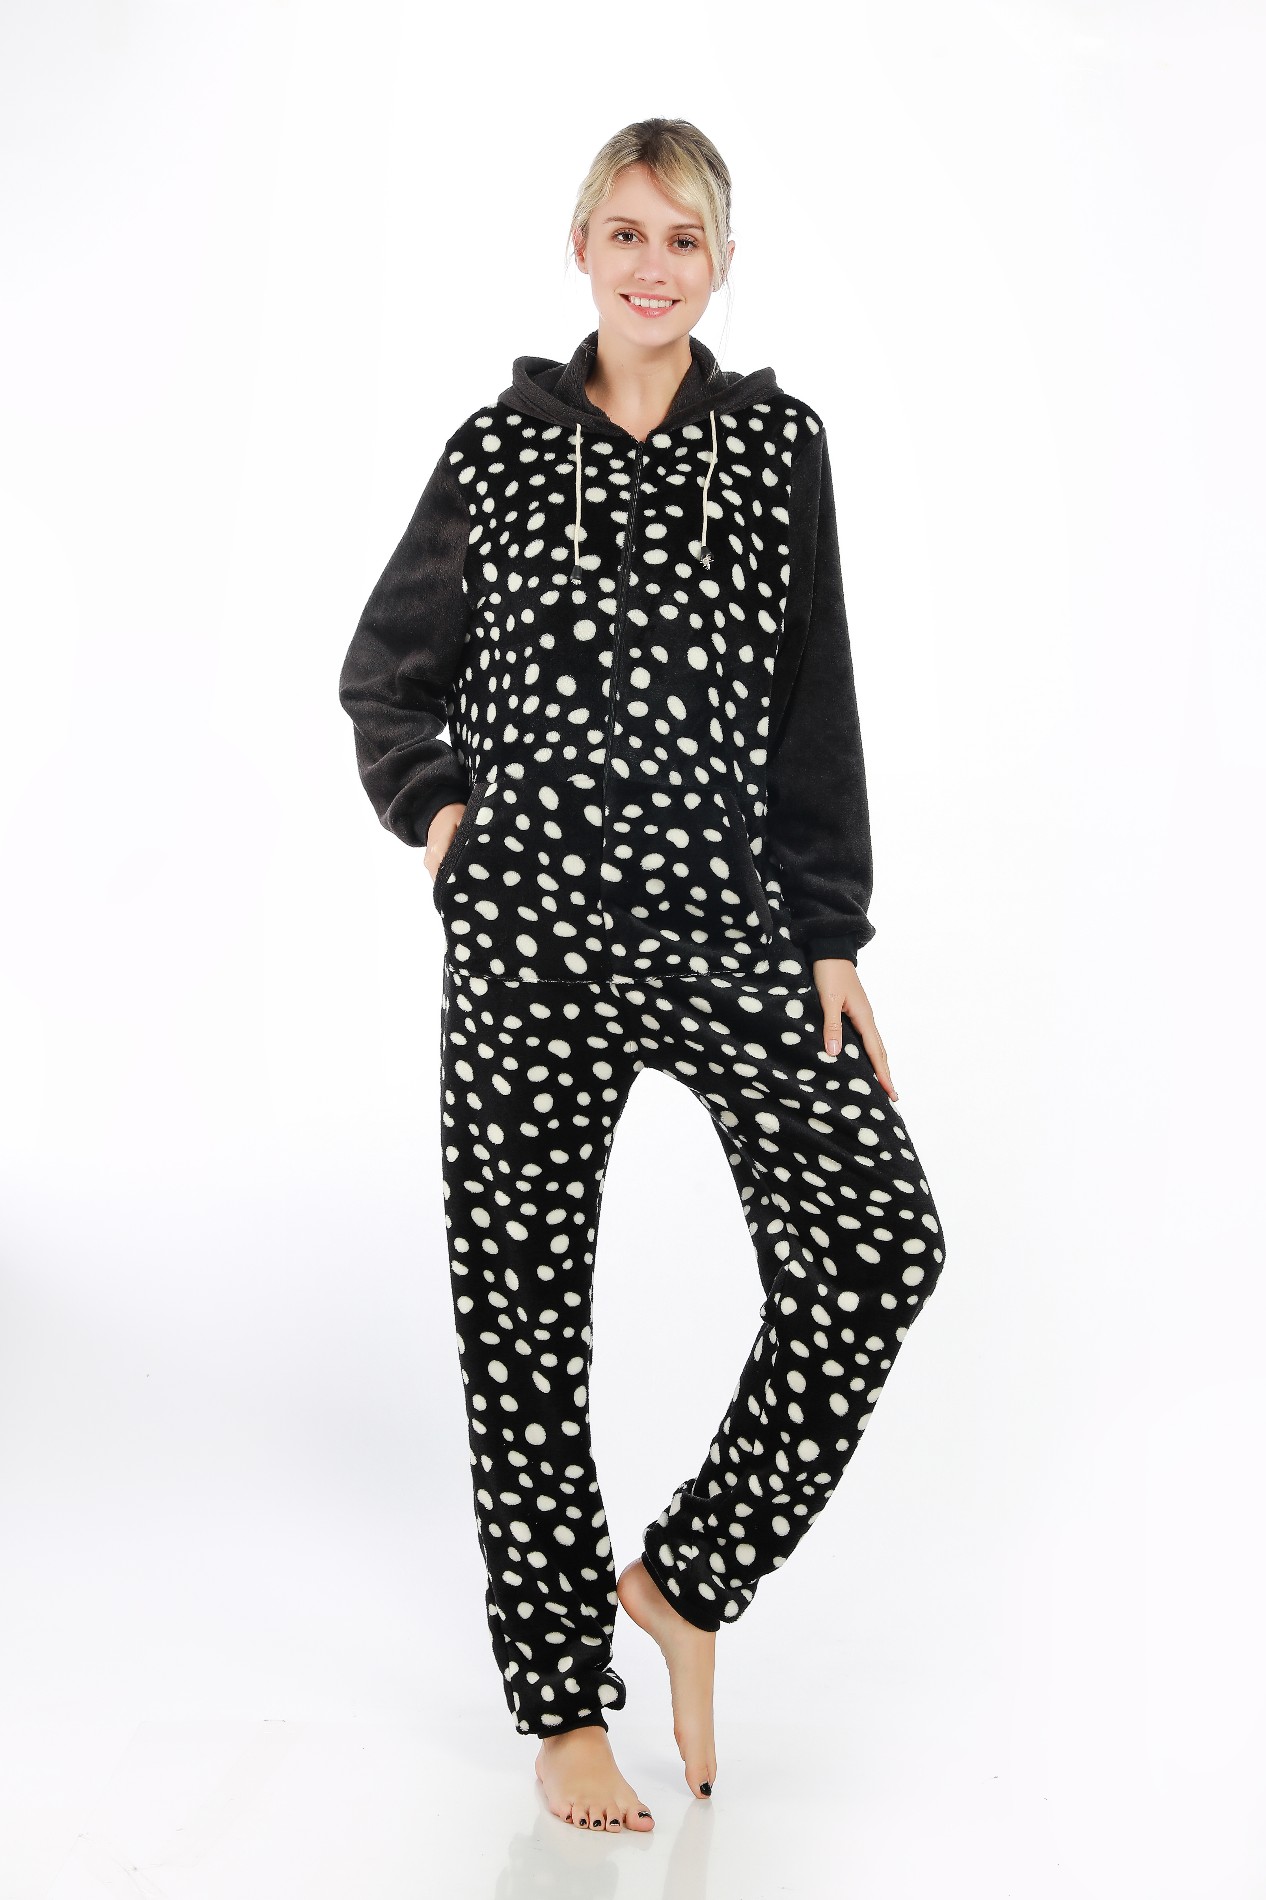 Comprar White Spotted Pajamas Womens Flannel Jumpsuit, White Spotted Pajamas Womens Flannel Jumpsuit Precios, White Spotted Pajamas Womens Flannel Jumpsuit Marcas, White Spotted Pajamas Womens Flannel Jumpsuit Fabricante, White Spotted Pajamas Womens Flannel Jumpsuit Citas, White Spotted Pajamas Womens Flannel Jumpsuit Empresa.